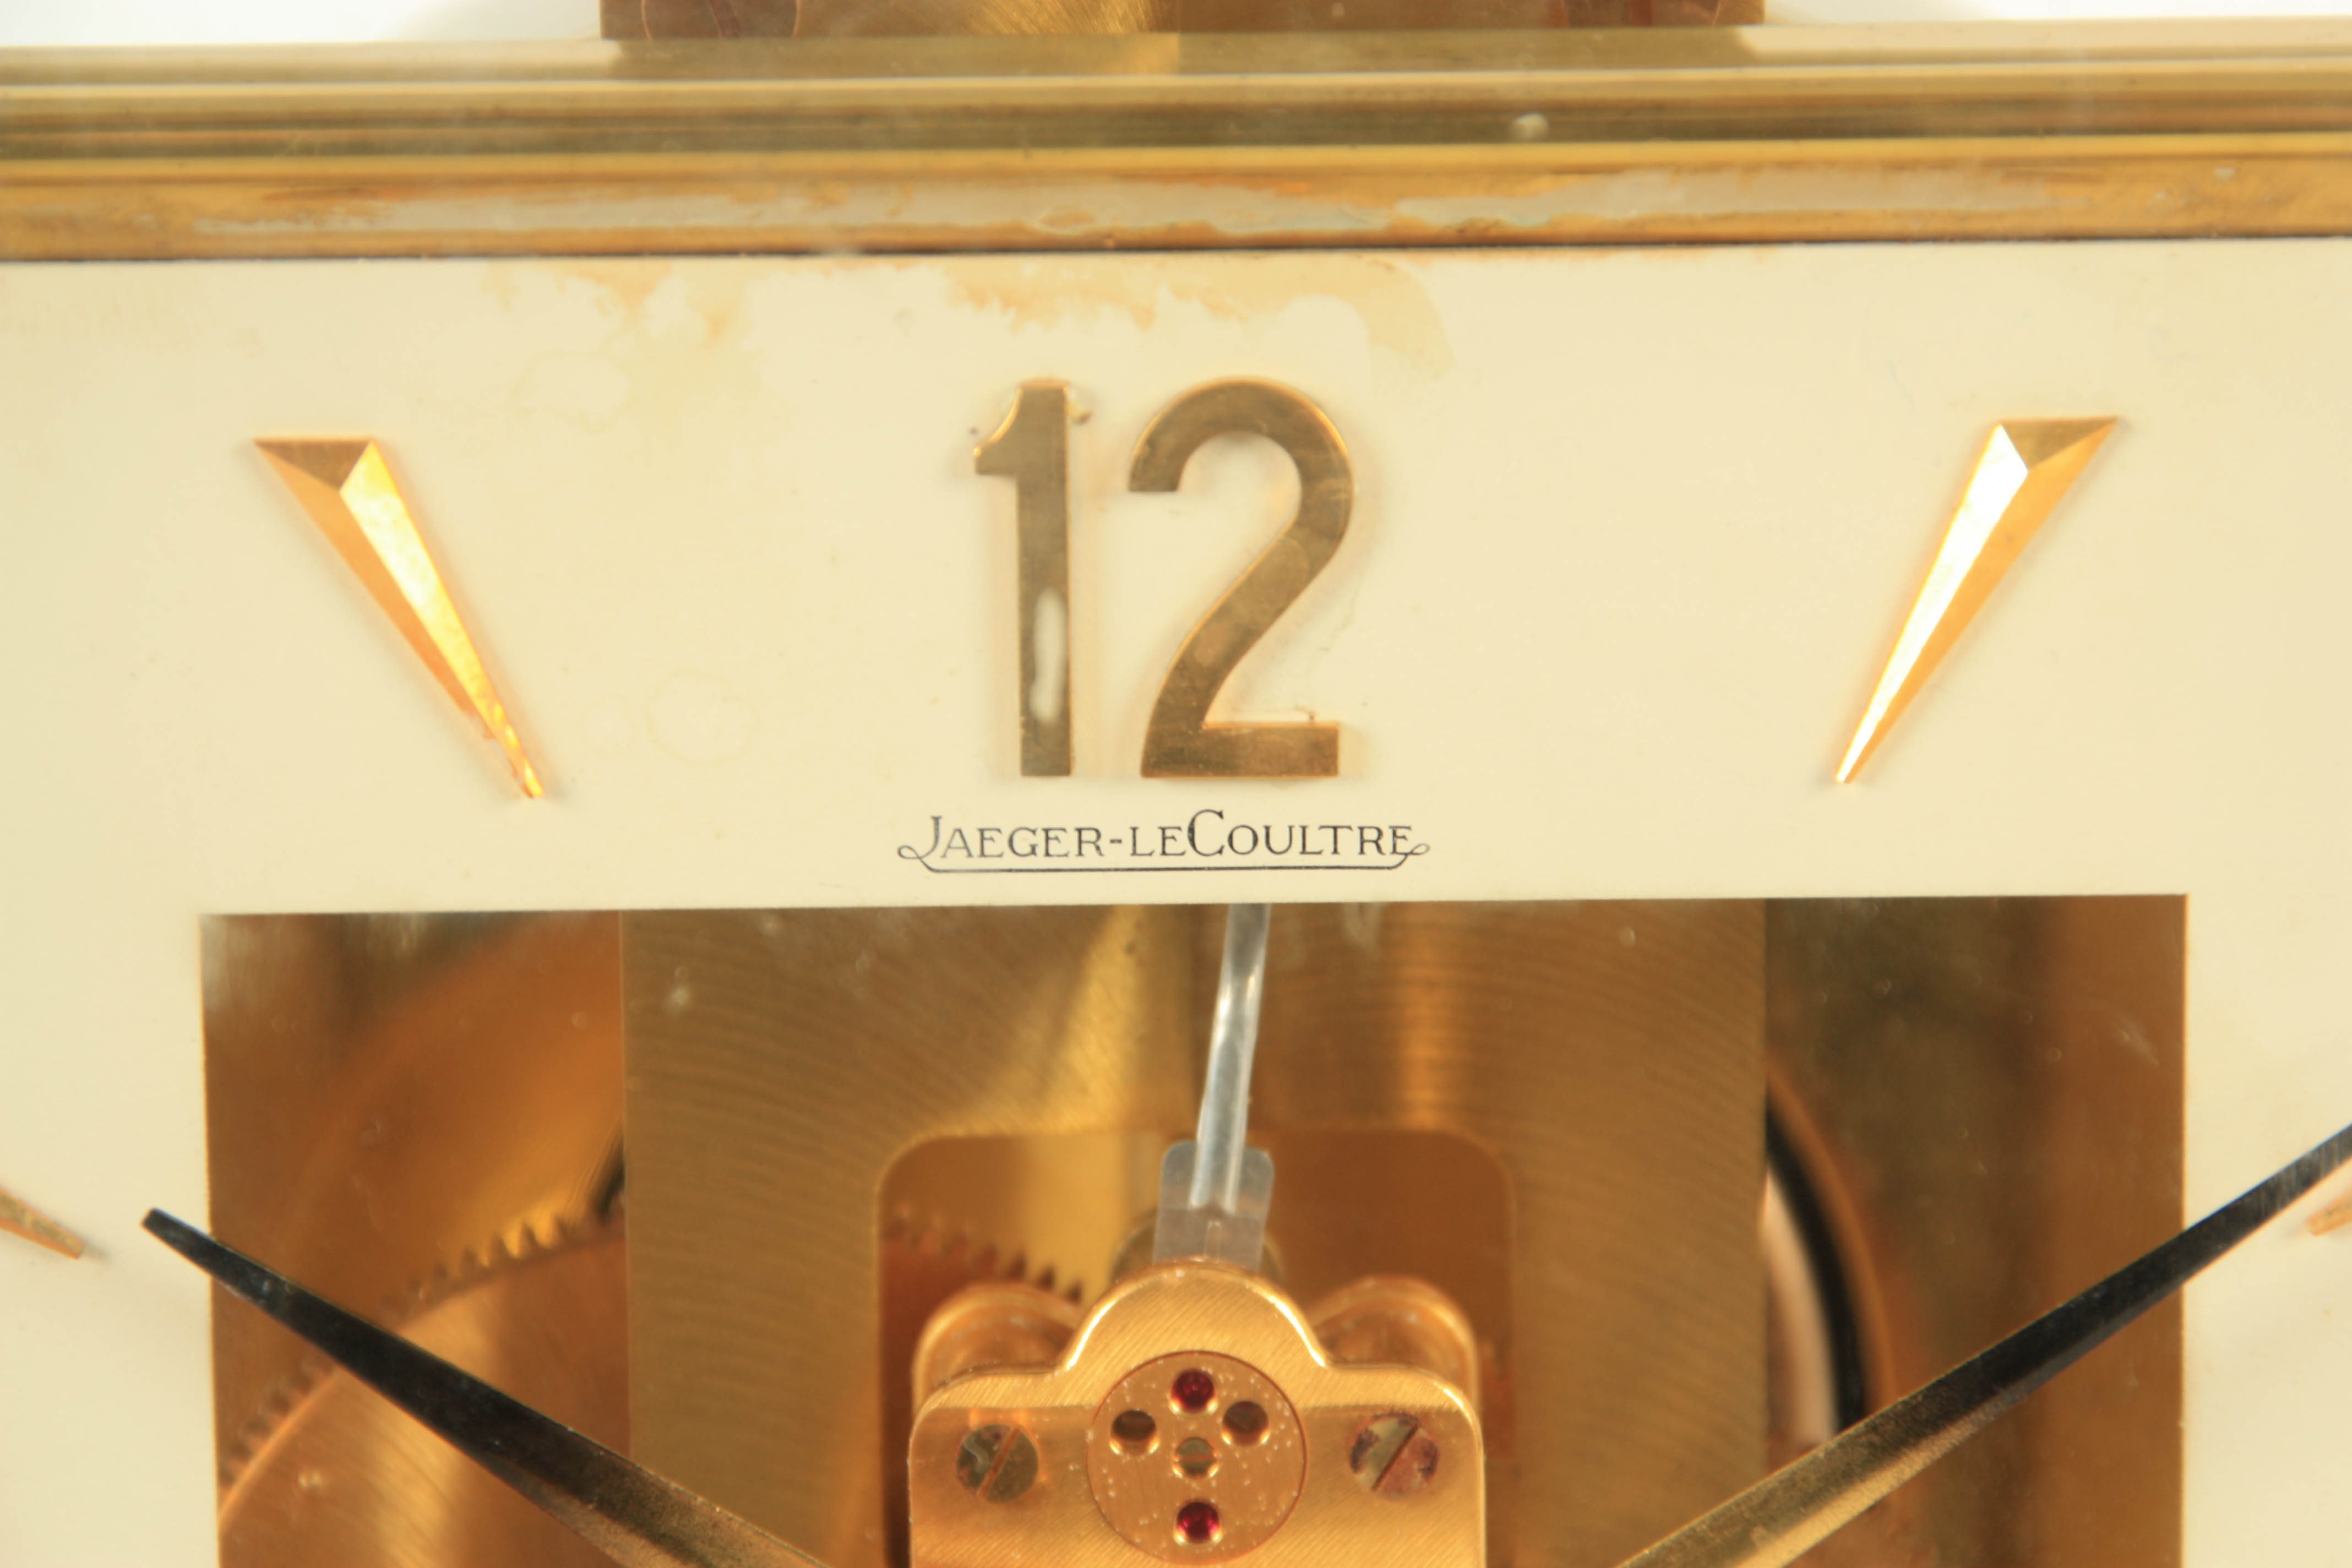 A JAEGER-LECOULTRE ATMOS CLOCK the gilt brass framed case with removable front glass panel enclosing - Image 3 of 8